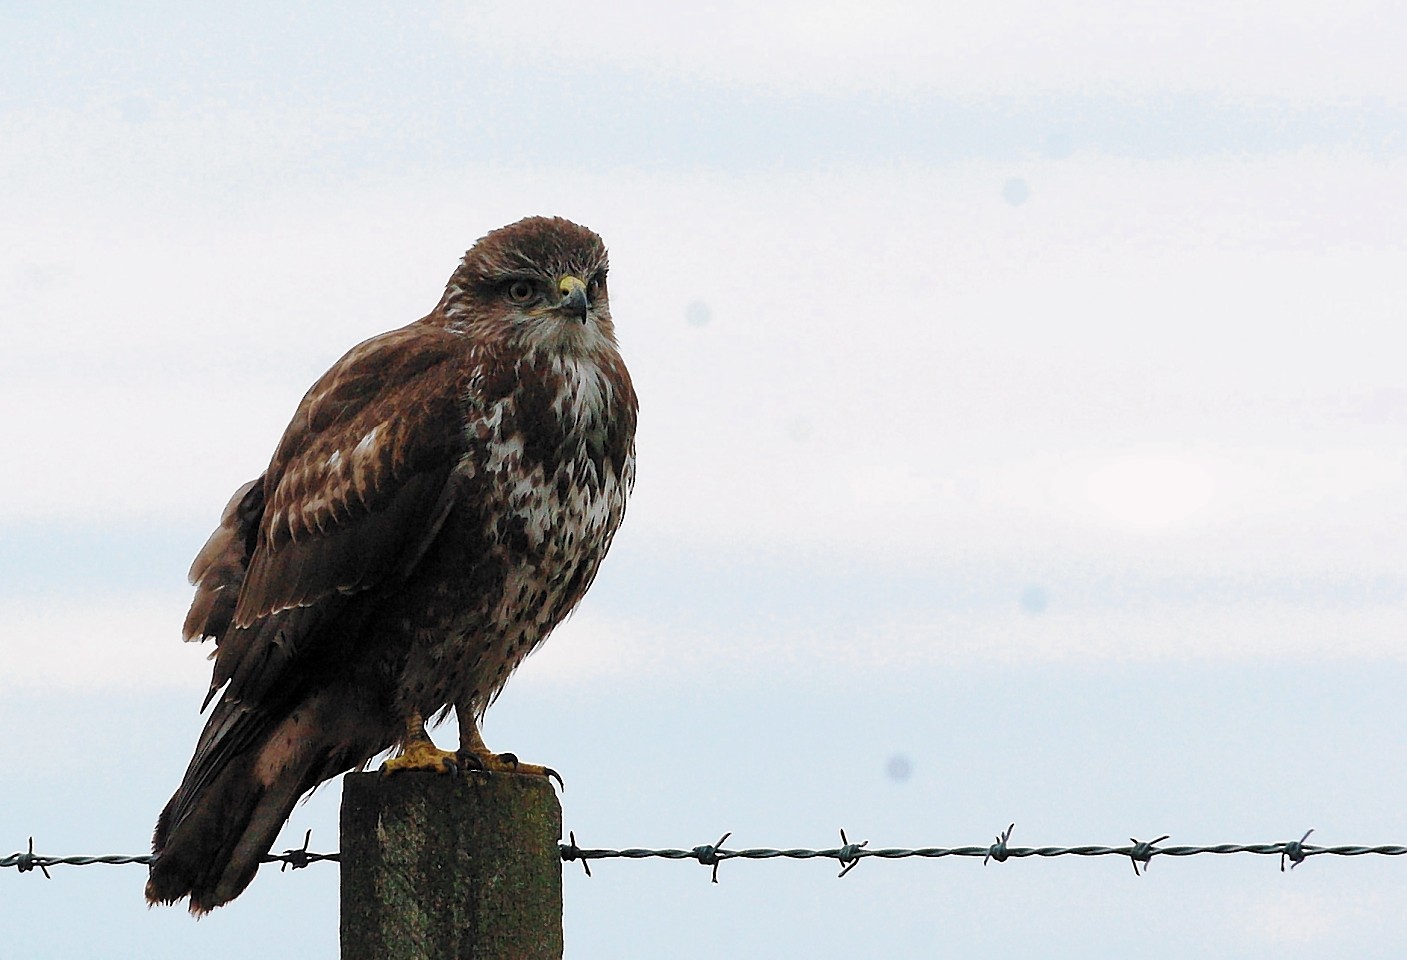 It is believed the bird could be a buzzard